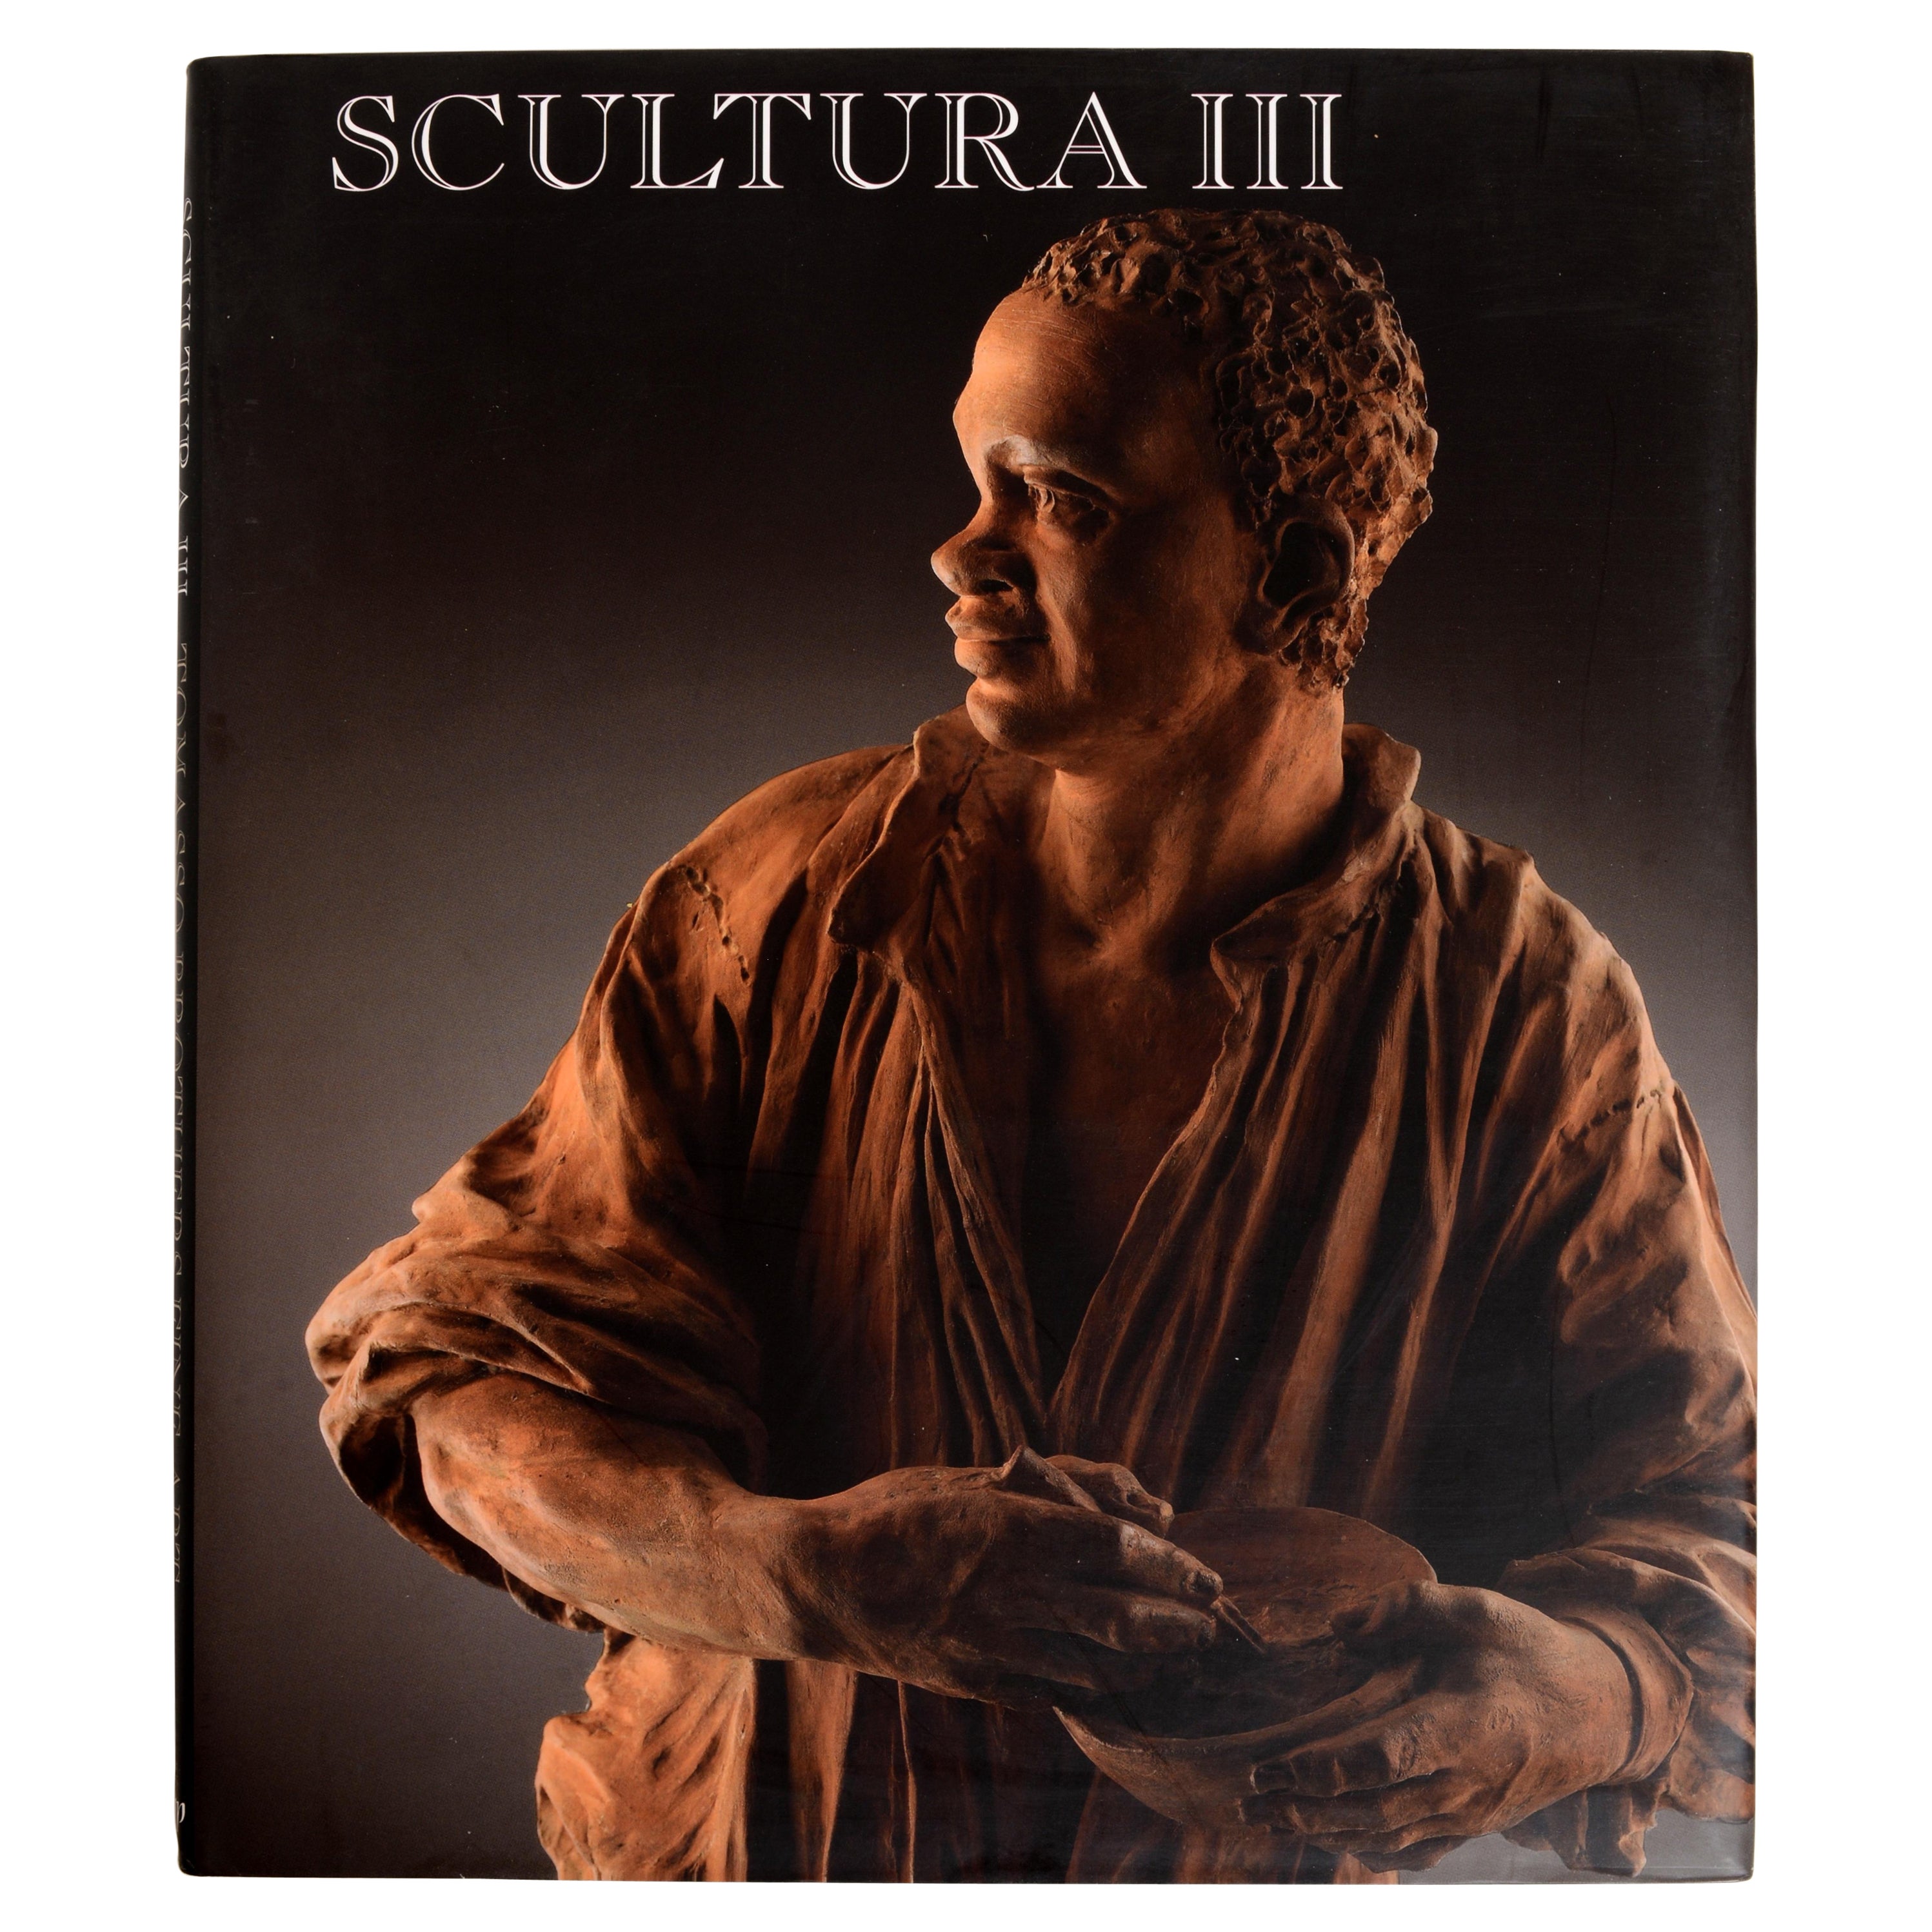 Scultura III Tomasso by Brothers Fine Art, 1st Ed